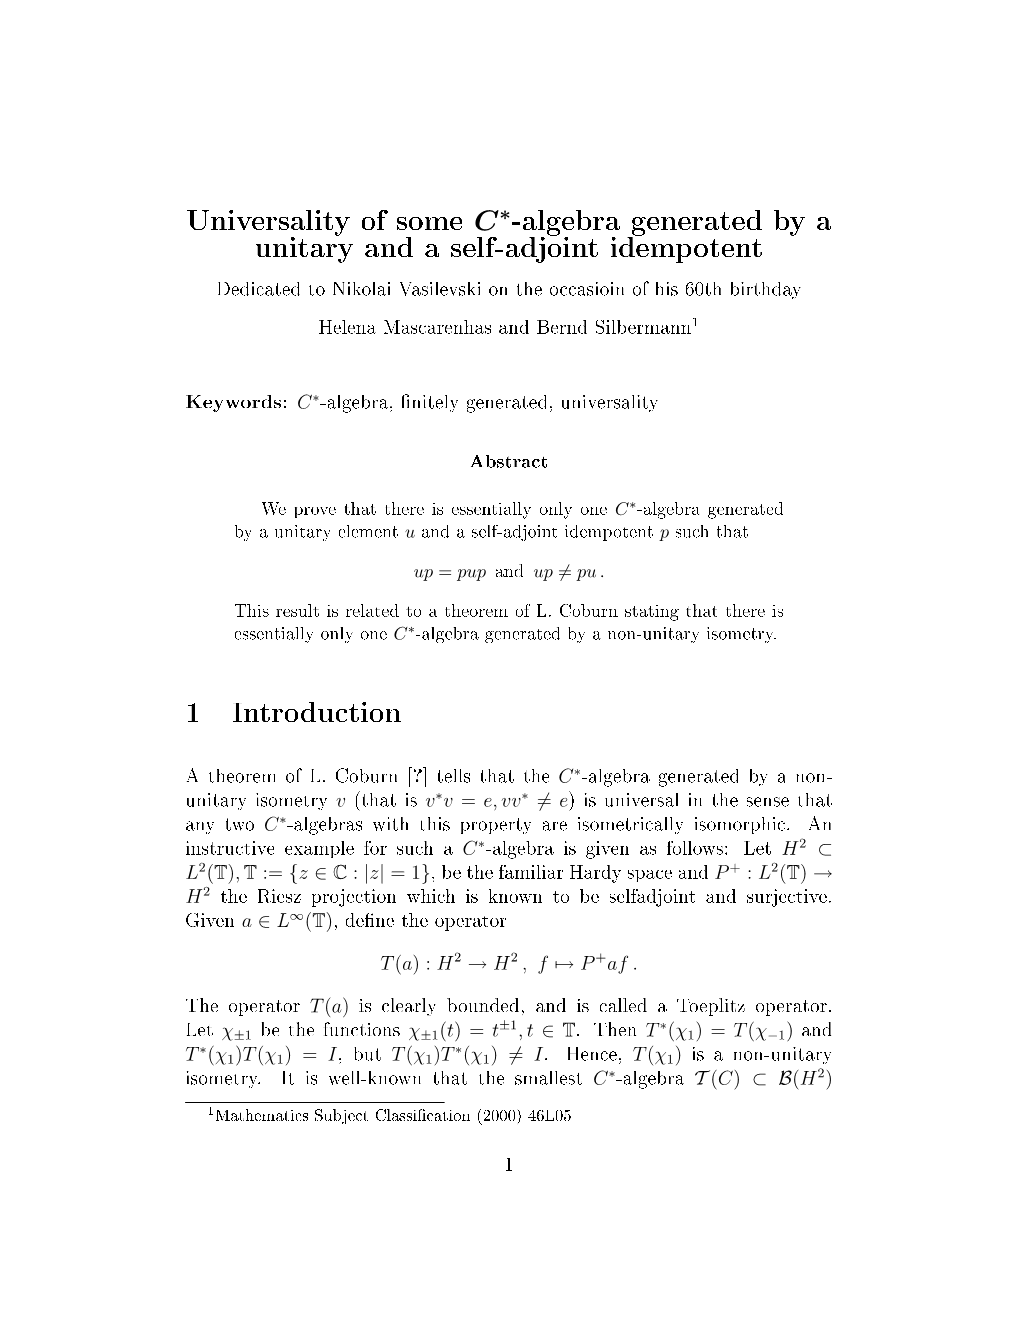 Universality of Some C ∗-Algebra Generated by a Unitary and a Self